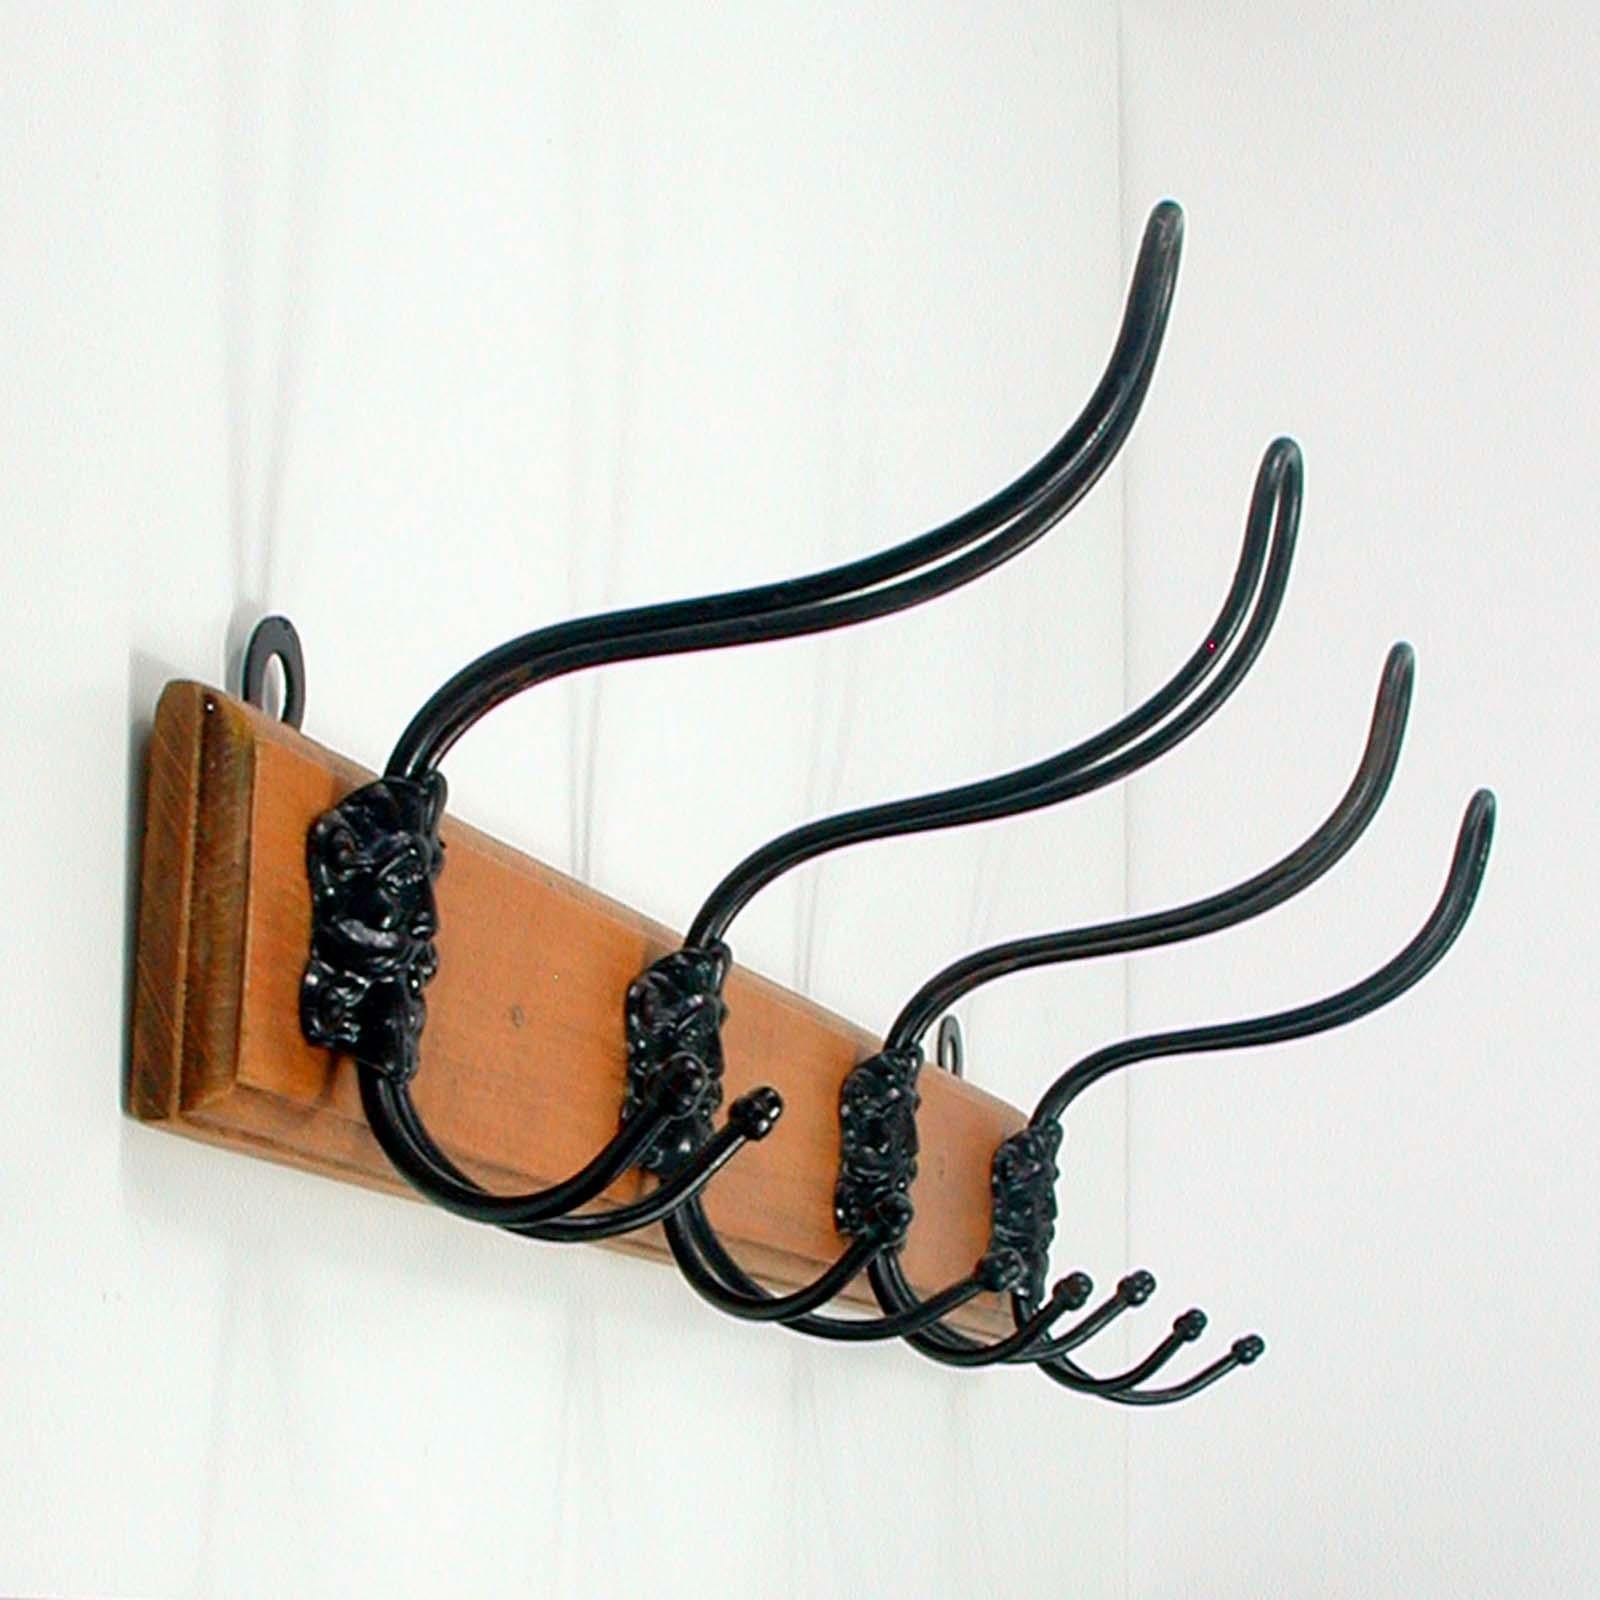 This cottage style coat hanger was manufactured in German in the 1920s. It is made of wood (I assume pine wood) and has got 4 black lacquered hooks with the head of the Greek God Zeus. 

A very unusual piece.